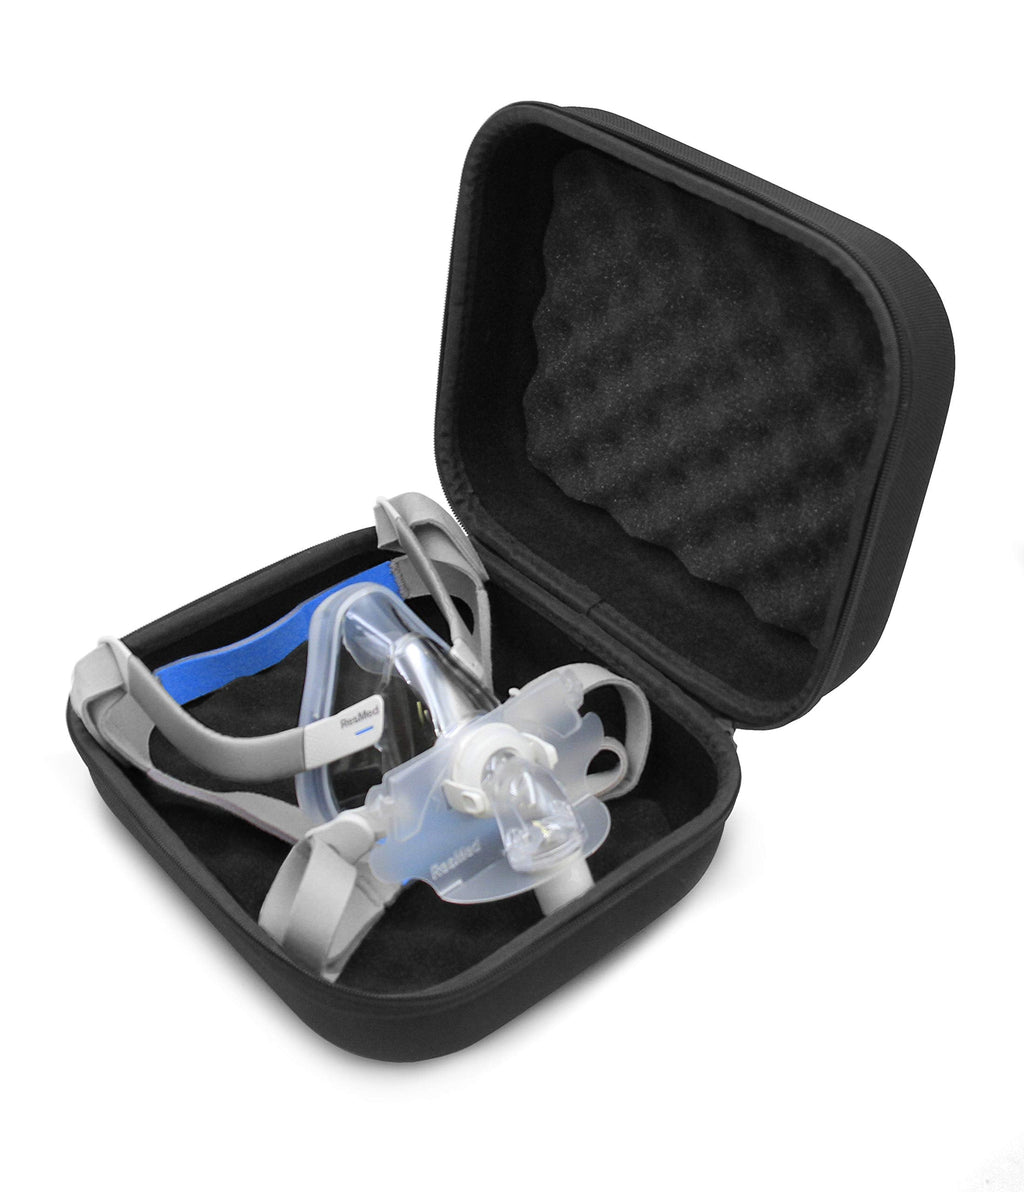 [Australia - AusPower] - Casematix CPAP Face Mask Storage Case Compatible with ResMed Airtouch F20, Airfit Full Face and More Sleep Apnea Accessories, Blocks Dirt and Dust - CASE ONLY 